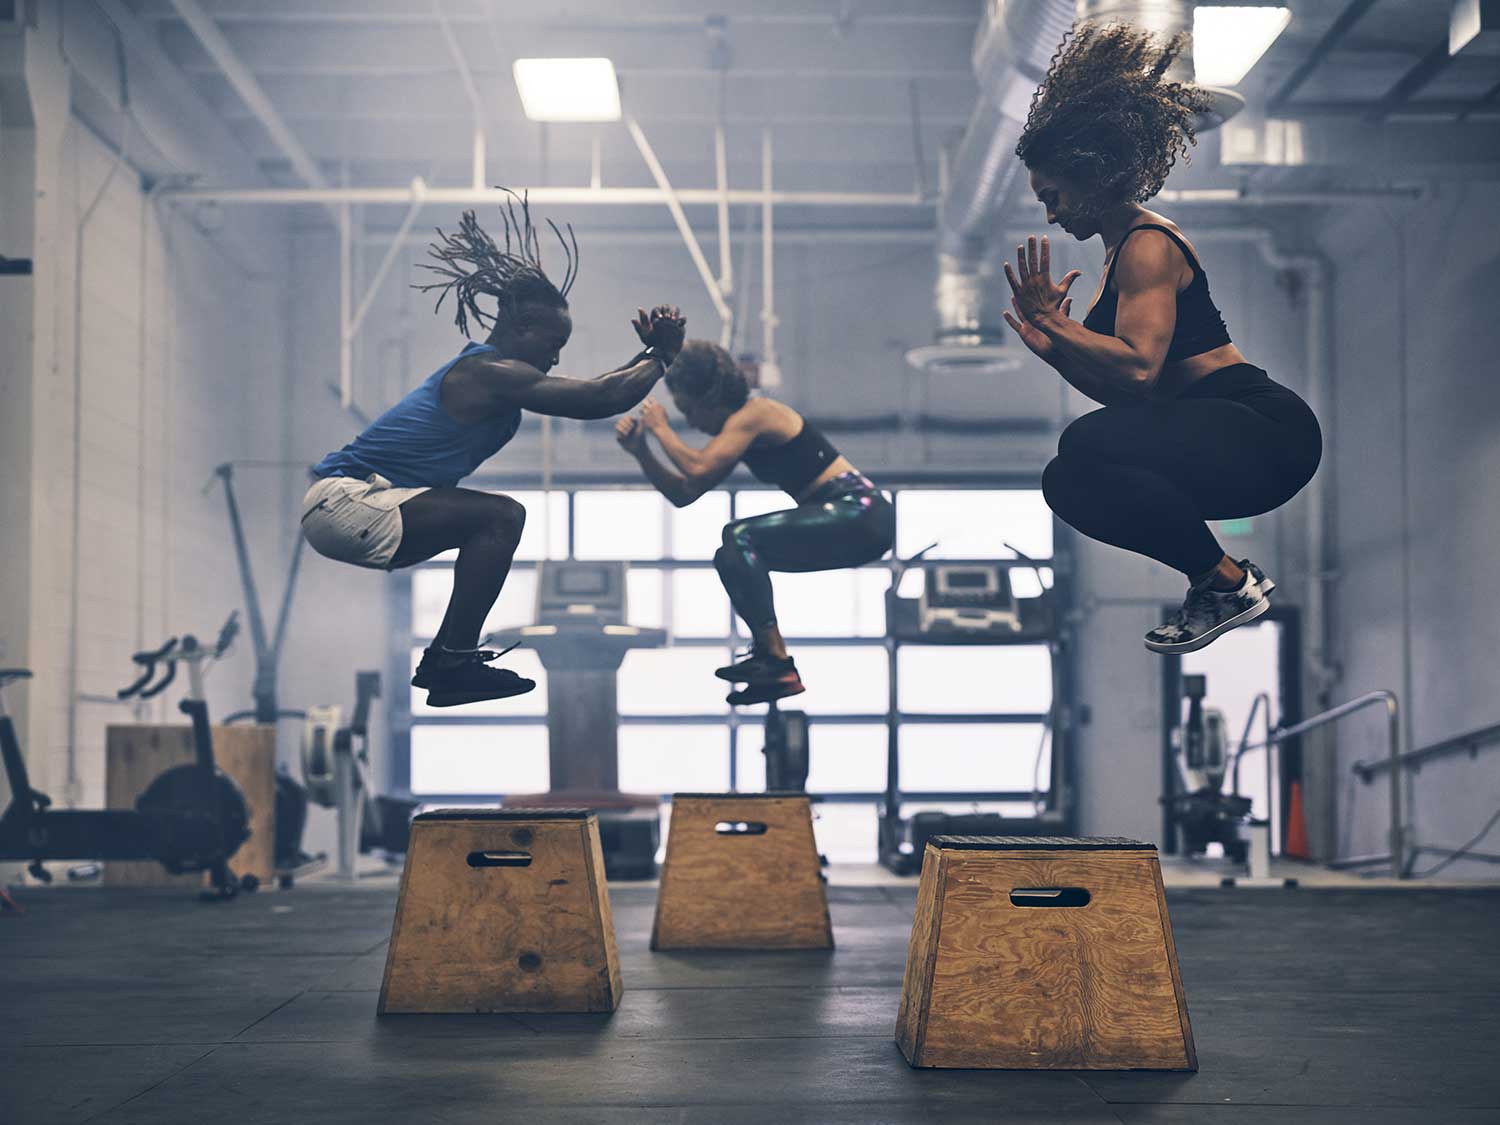 Three women doing jump squats in a gym.